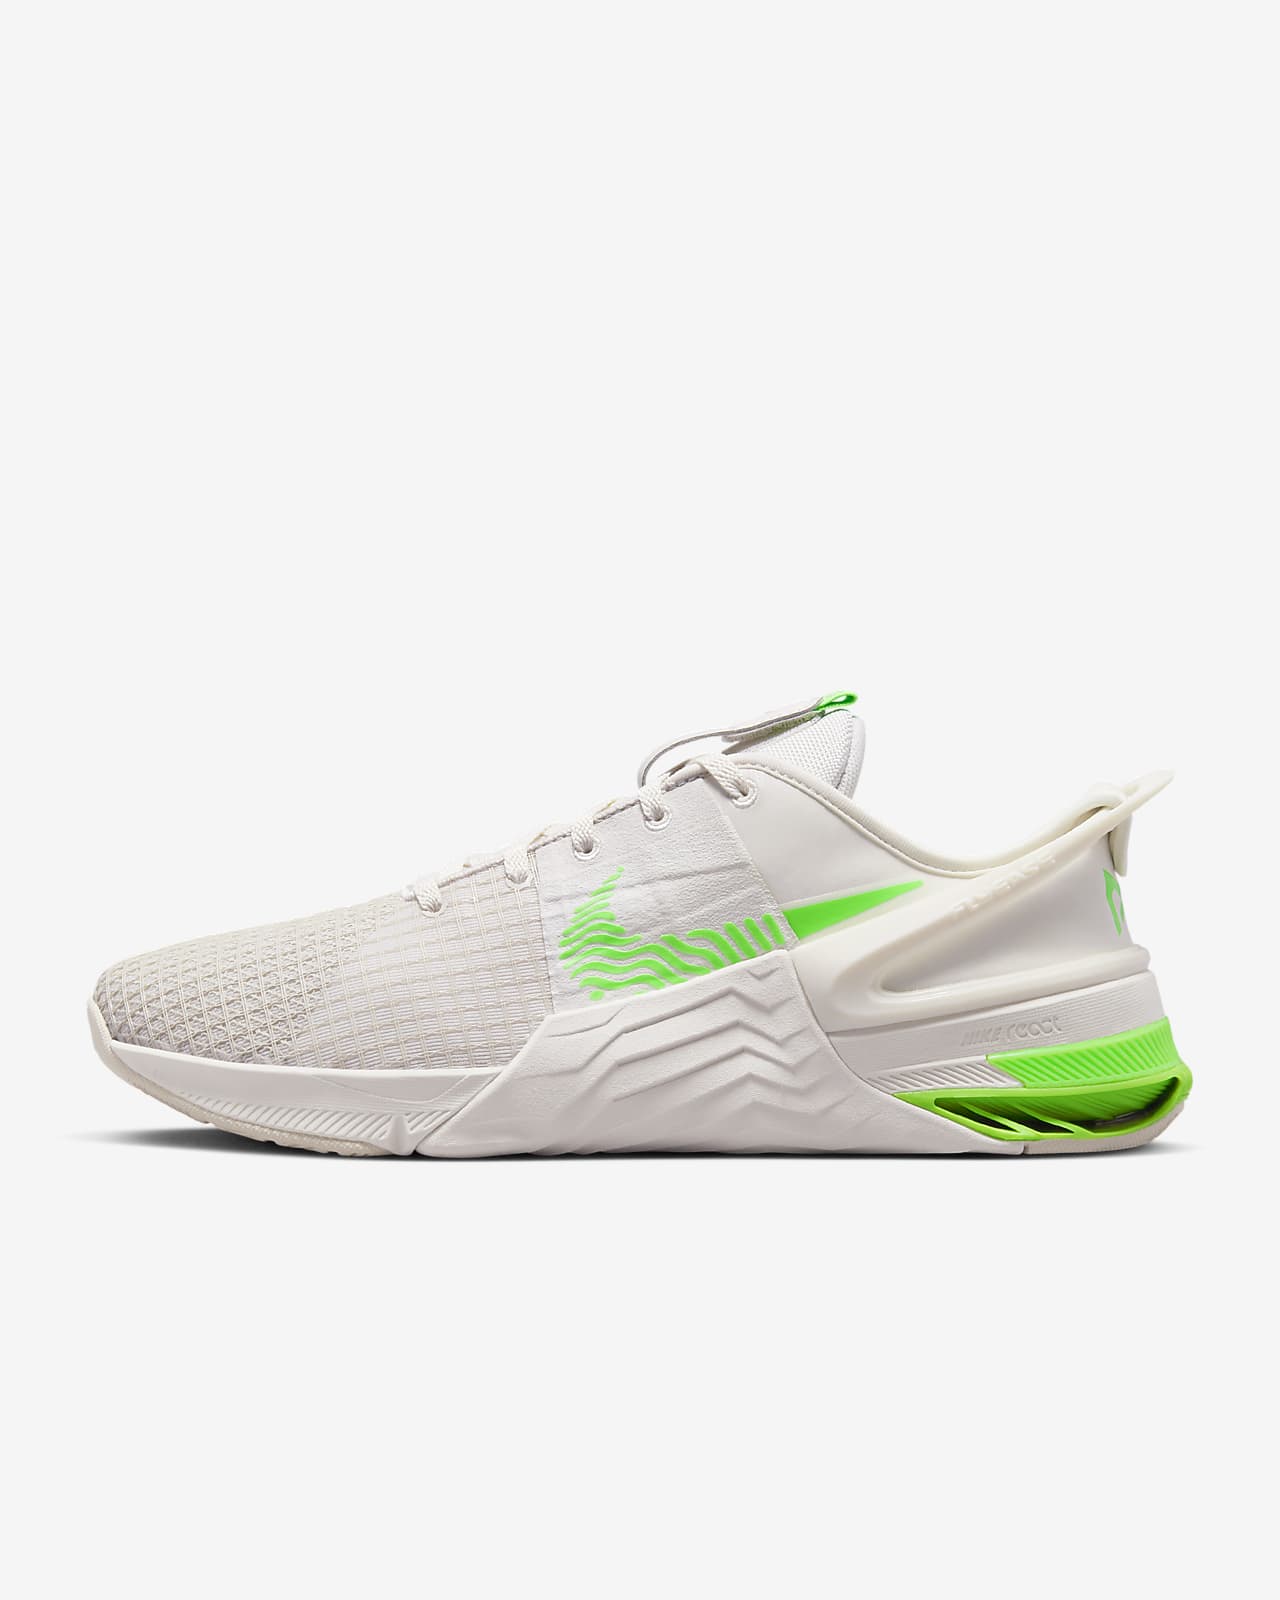 Nike Metcon 8 FlyEase Men's Easy On/Off Training Shoes